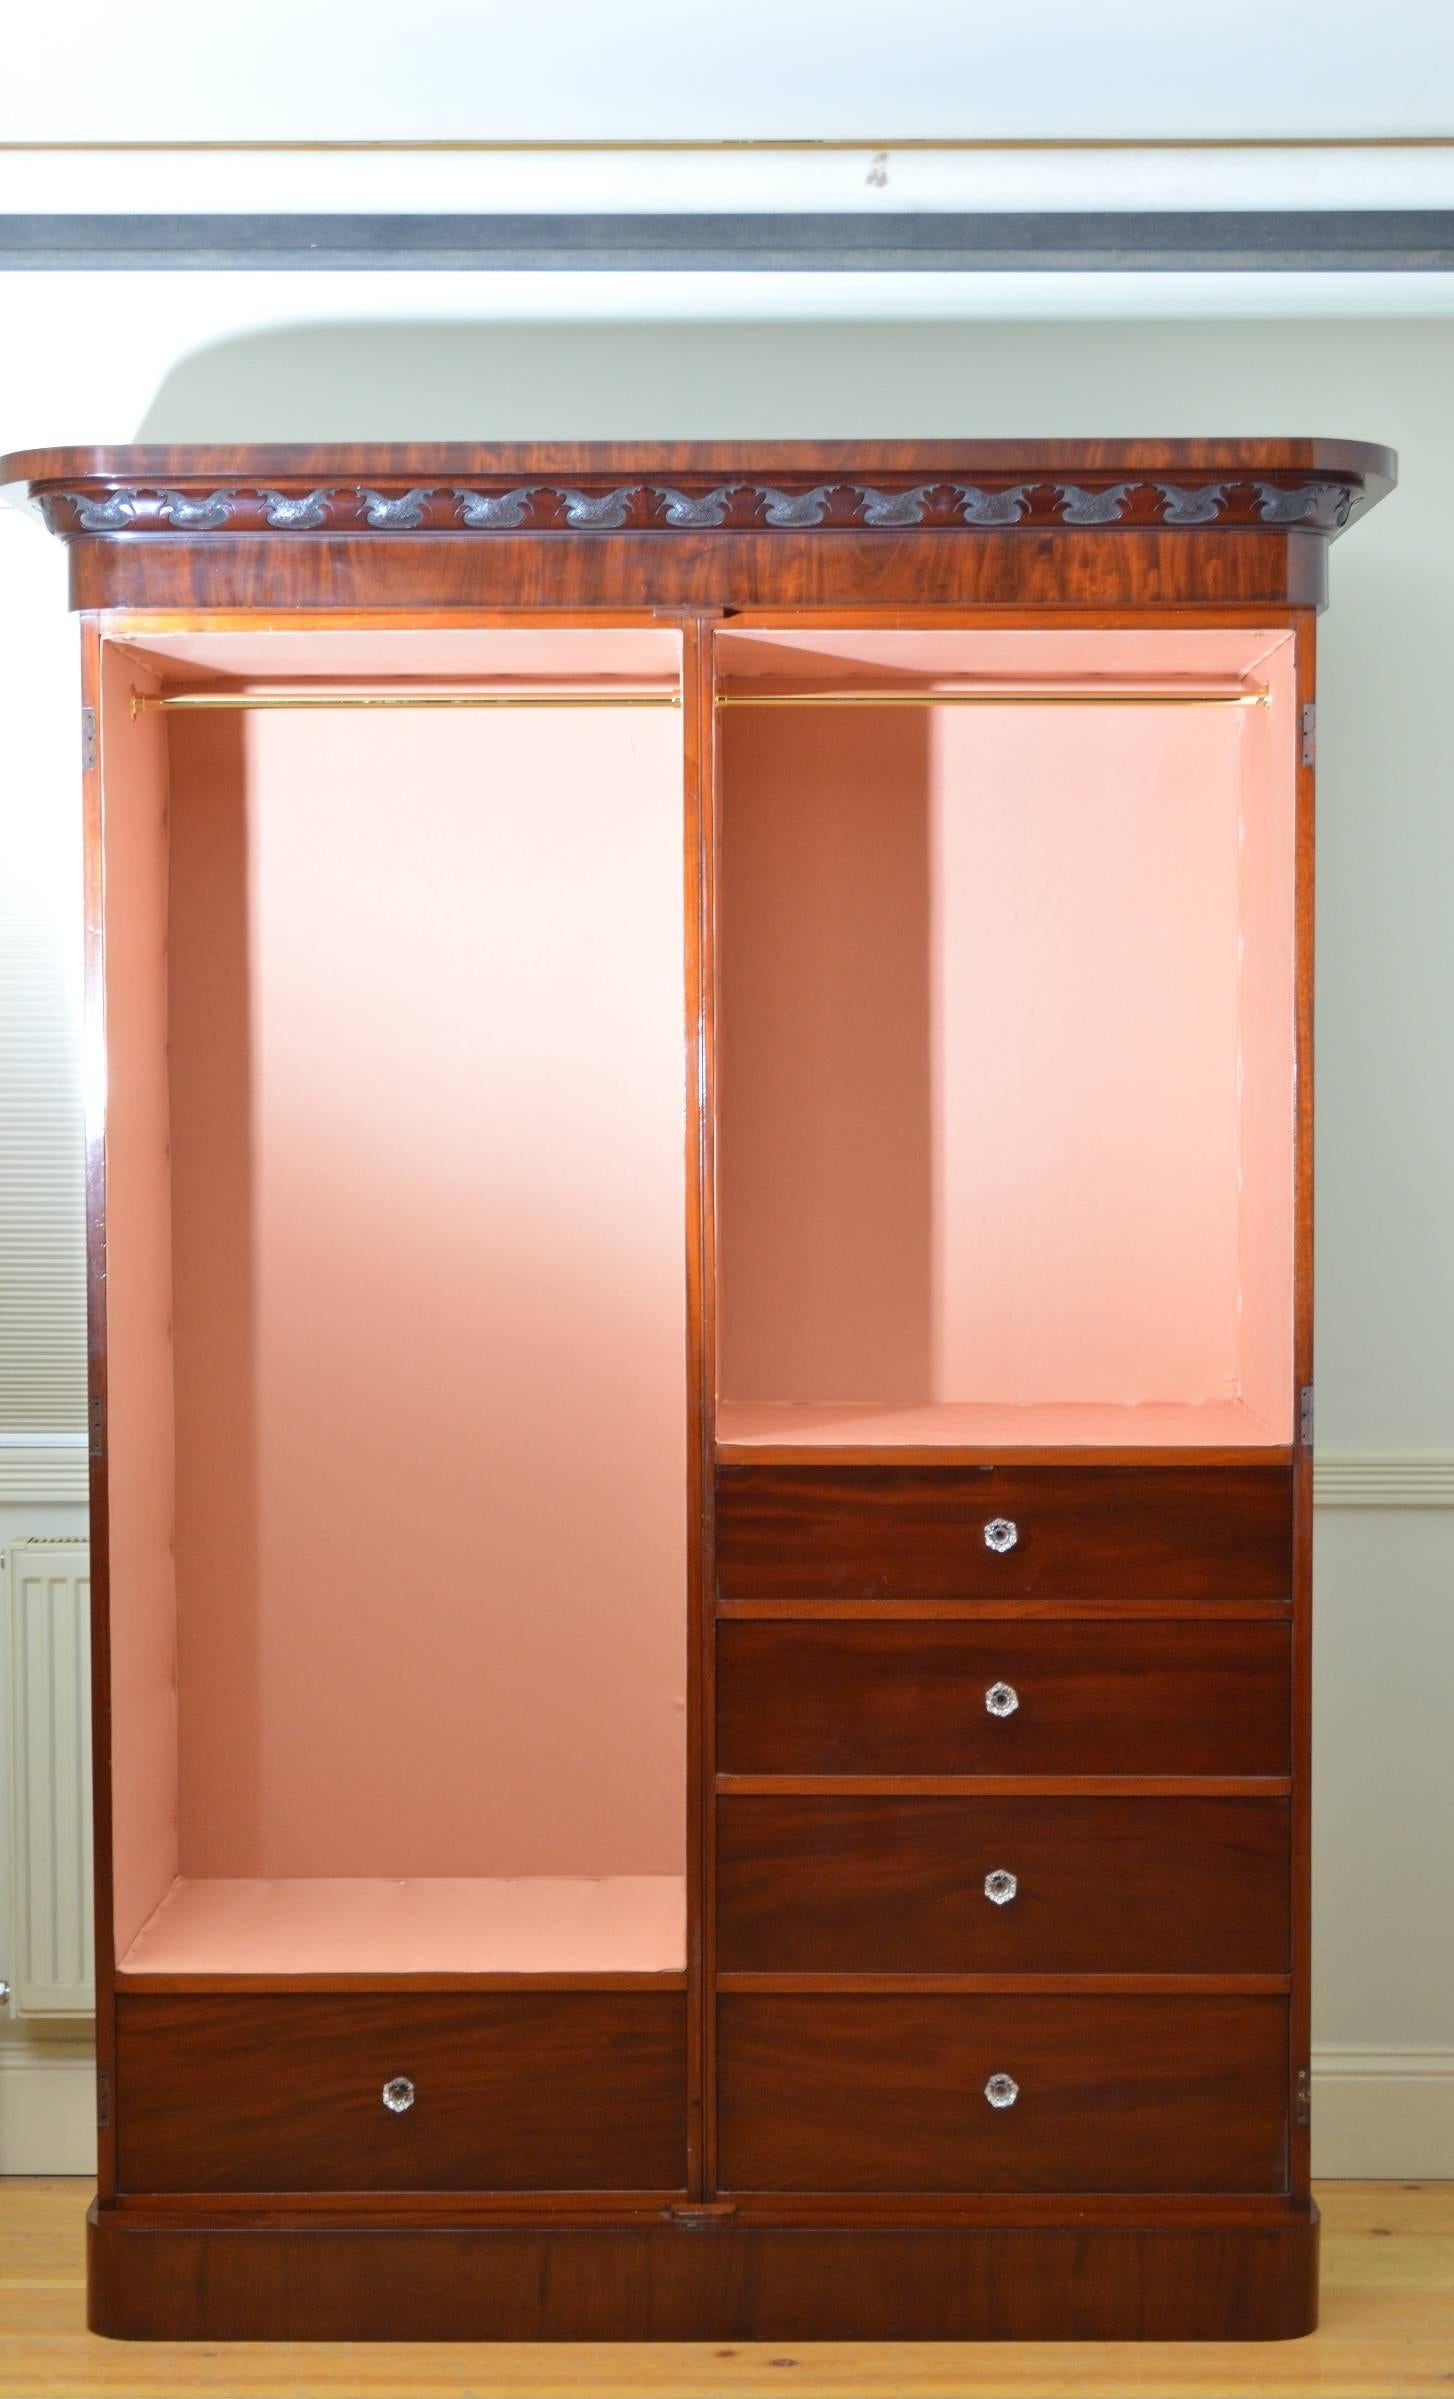 Sn3996, a fine quality and very elegant Victorian two-door solid wardrobe in mahogany having cavetto cornice with finely card fretwork to frieze and a pair of arched and panelled figured mahogany doors fitted with working lock and key enclosing